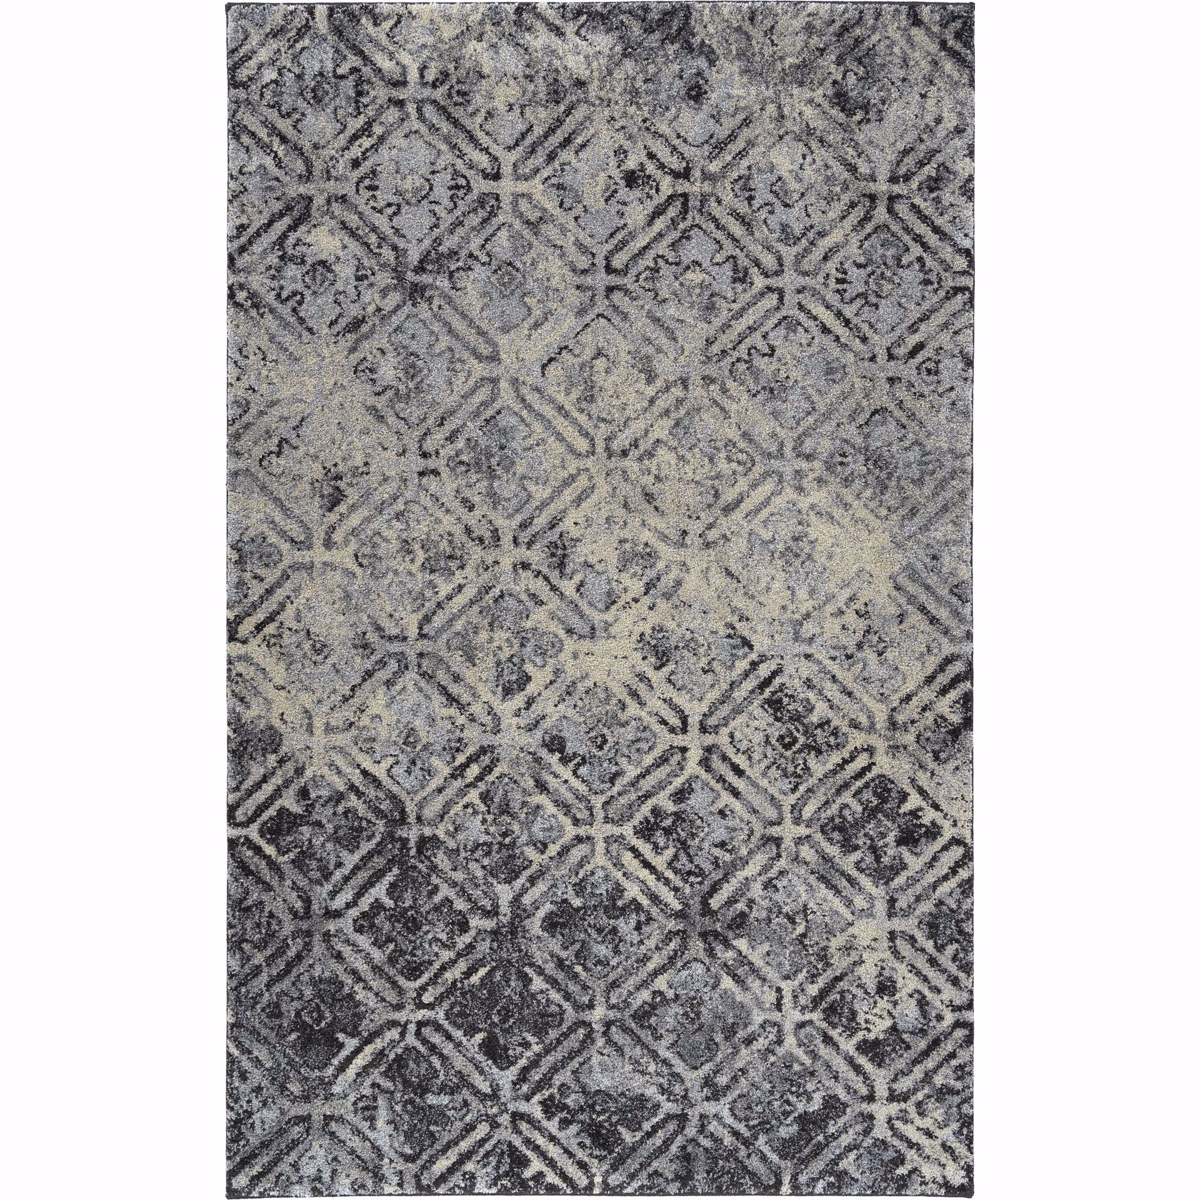 Picture of Aero Charcoal 5x7 Area Rug